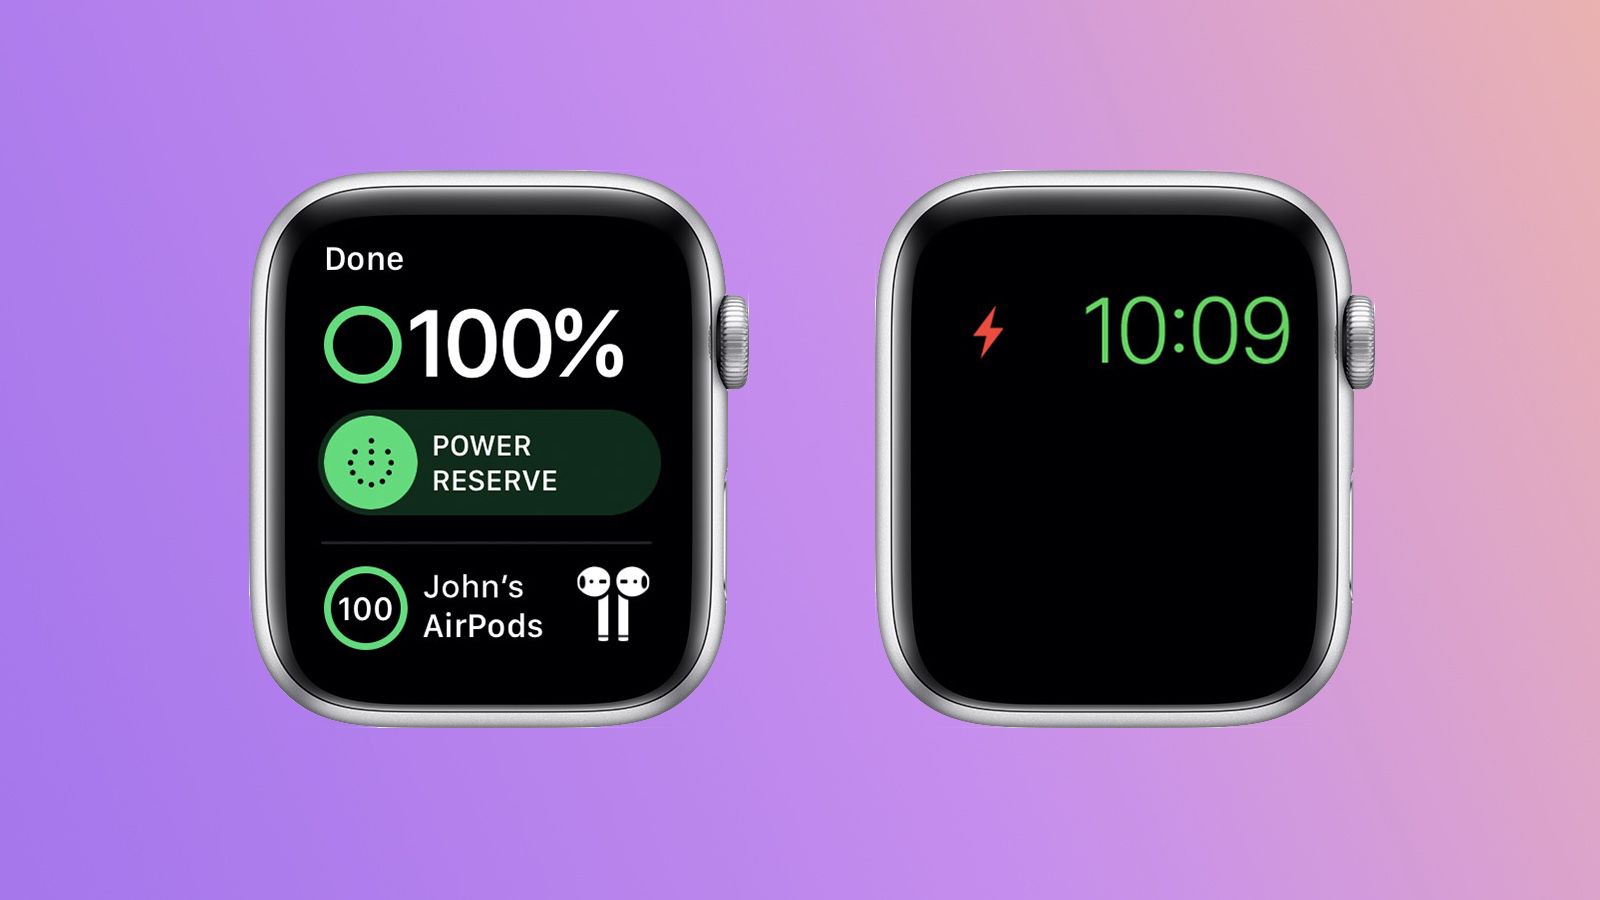 Apple Offering Free Repairs for Apple Watch Series 5 and SE Models With Power Issue Fixed watchOS 7.3.1 - MacRumors